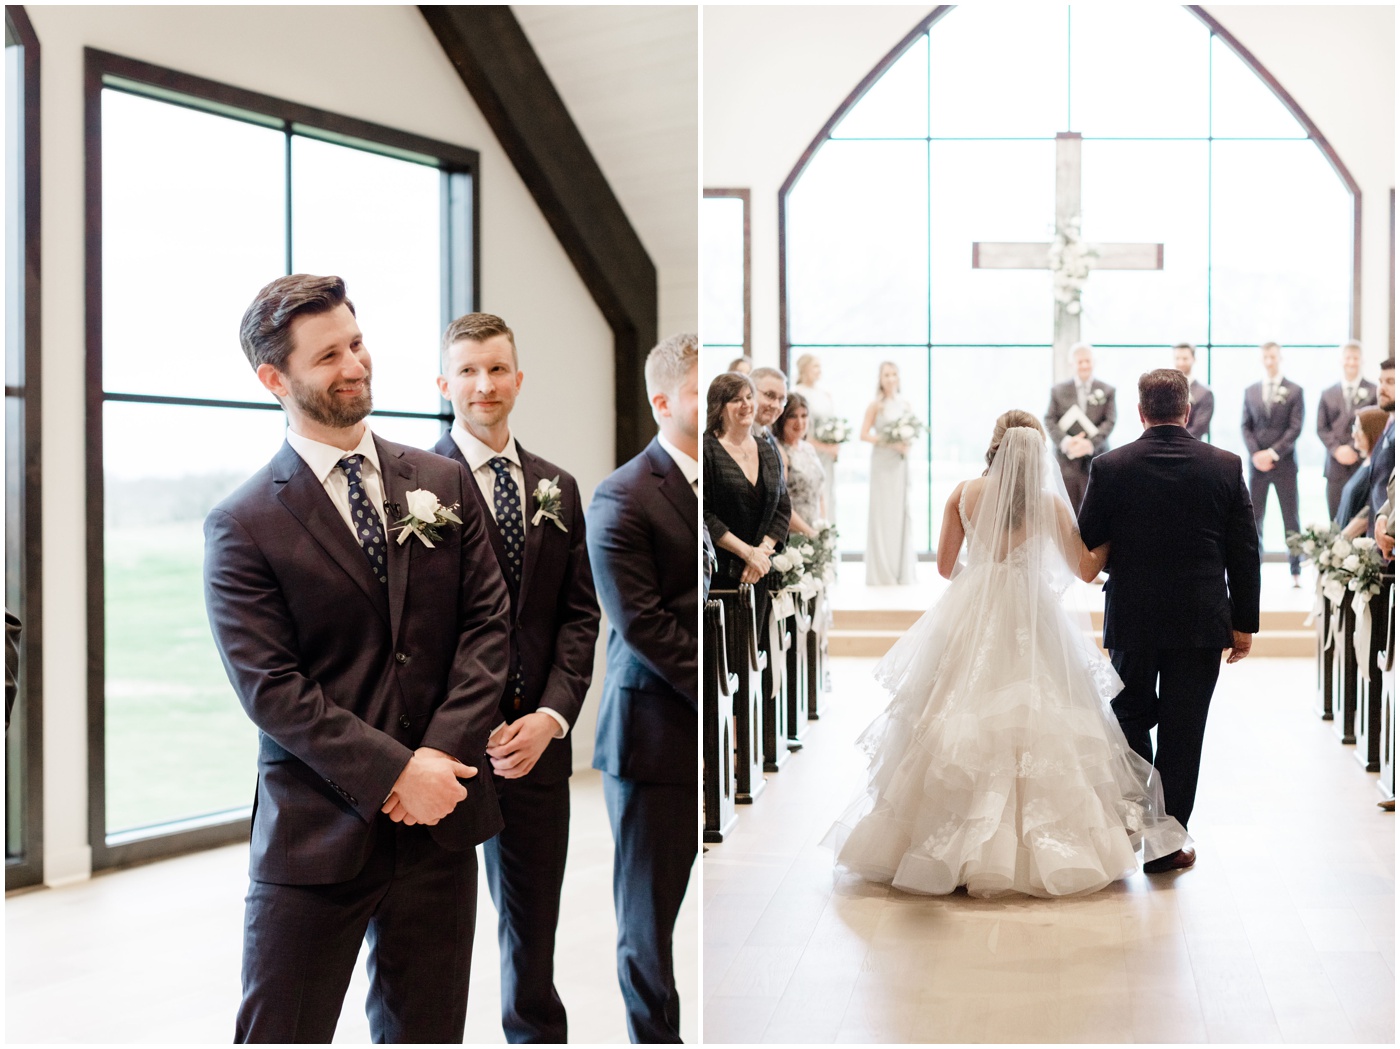 a groom is smiling as he sees his bride walking down the aisle